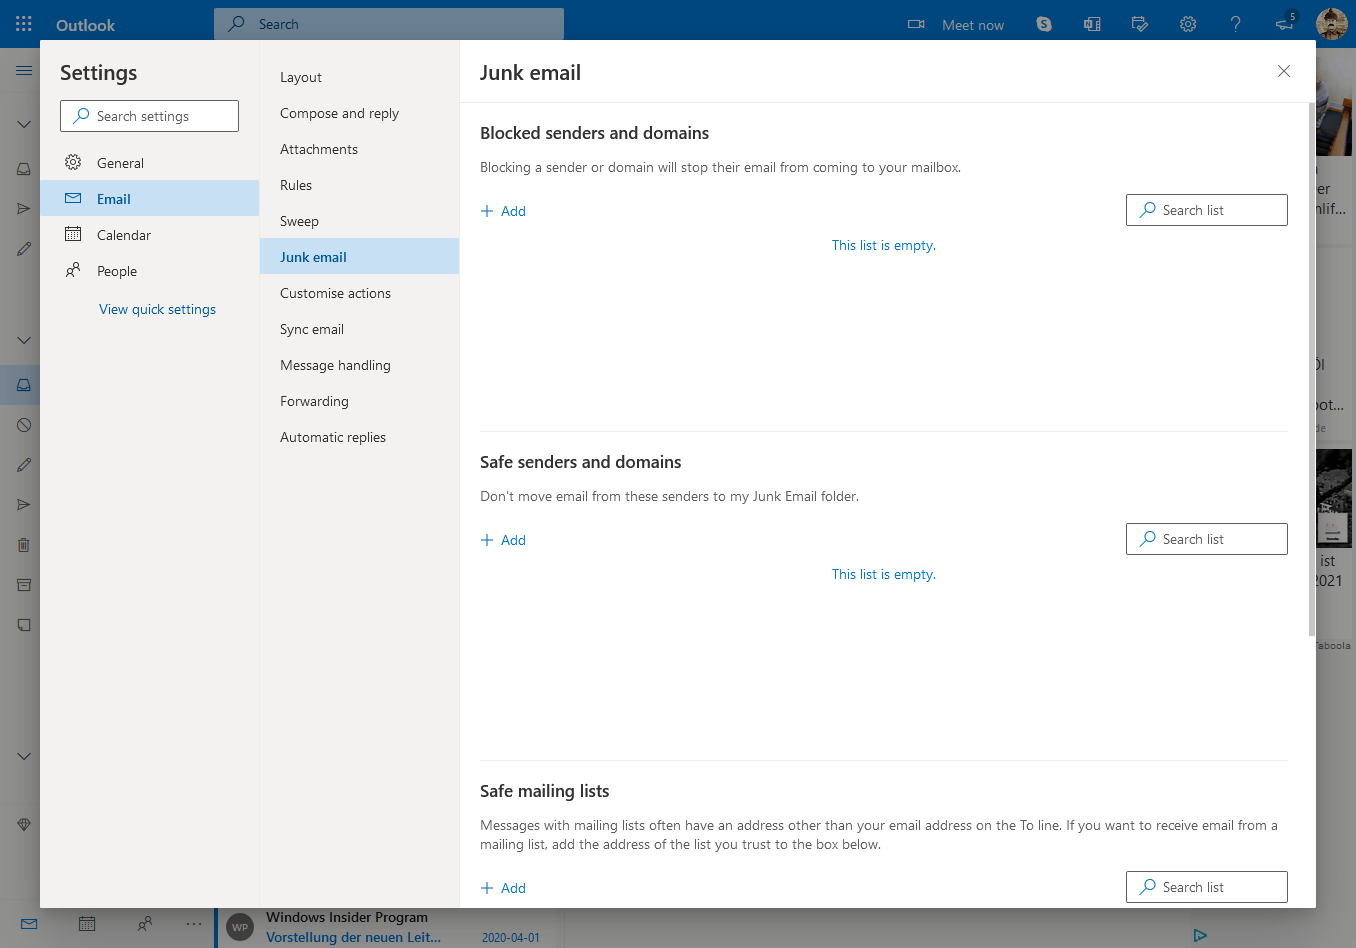 Junk email settings in Outlook.com